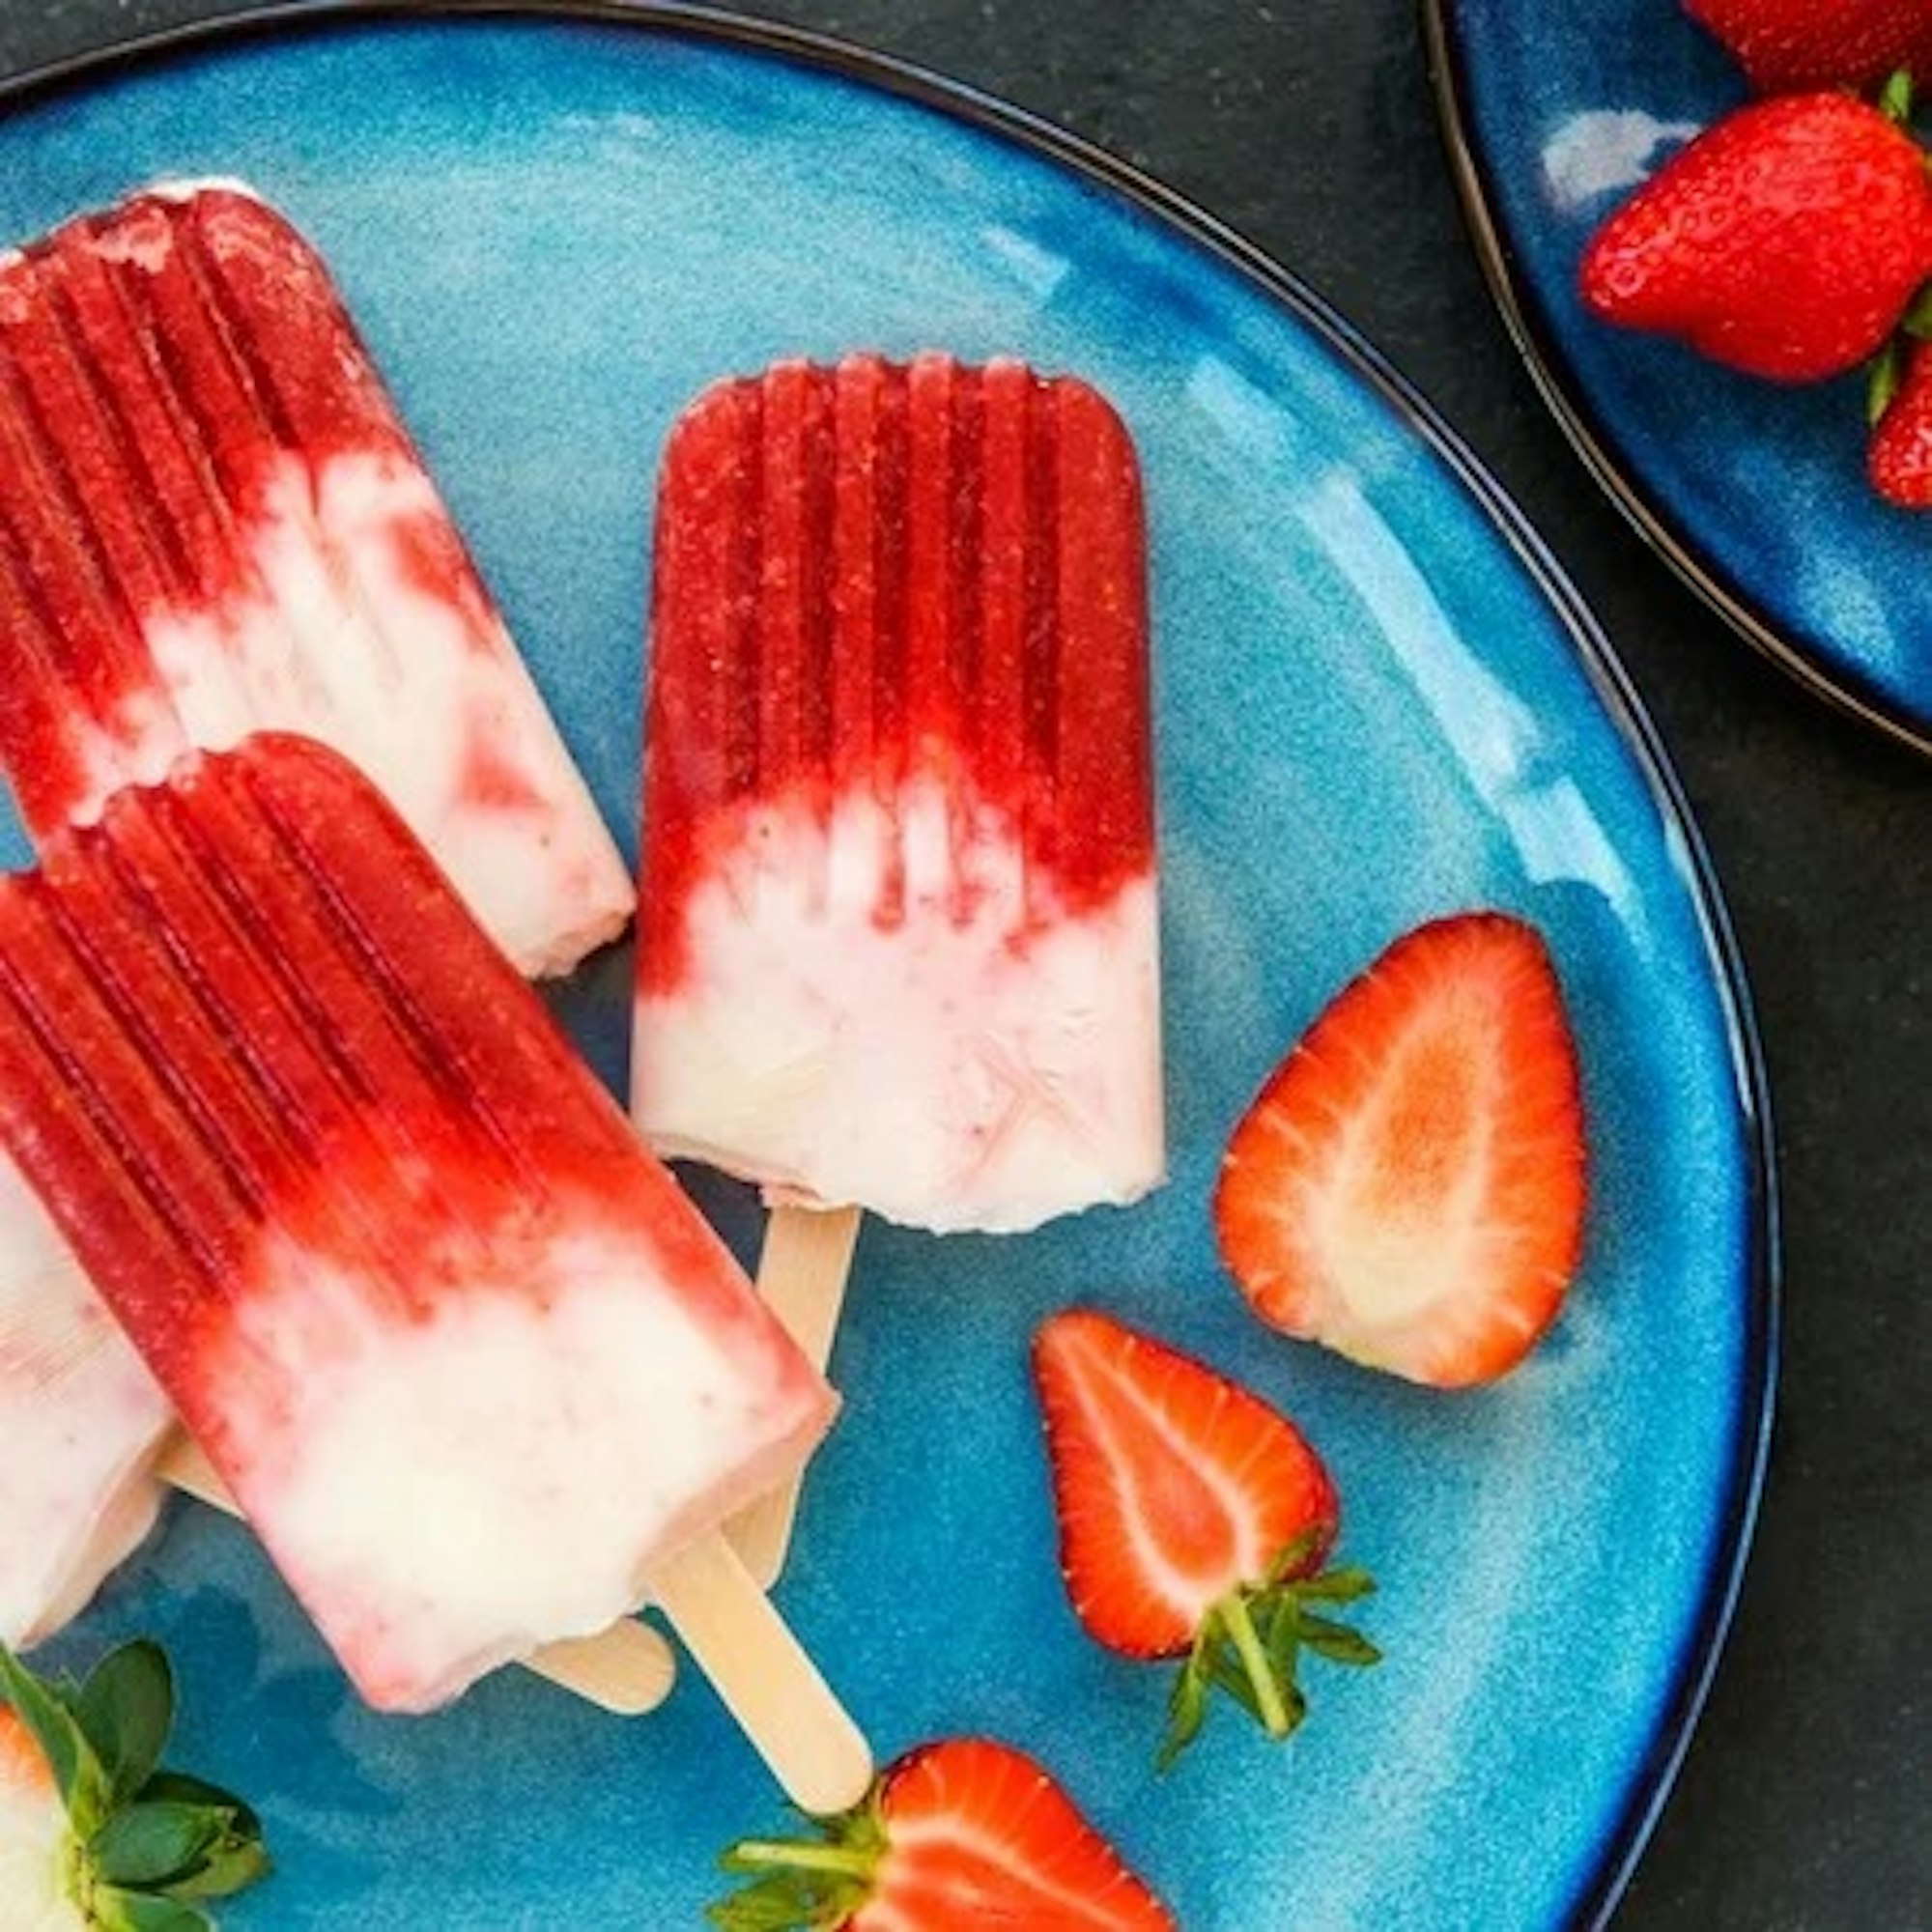 How to make icy poles? How to make summer desserts? Robins kitchen blog. strawberry and vanilla ice blocks on a blue plate.